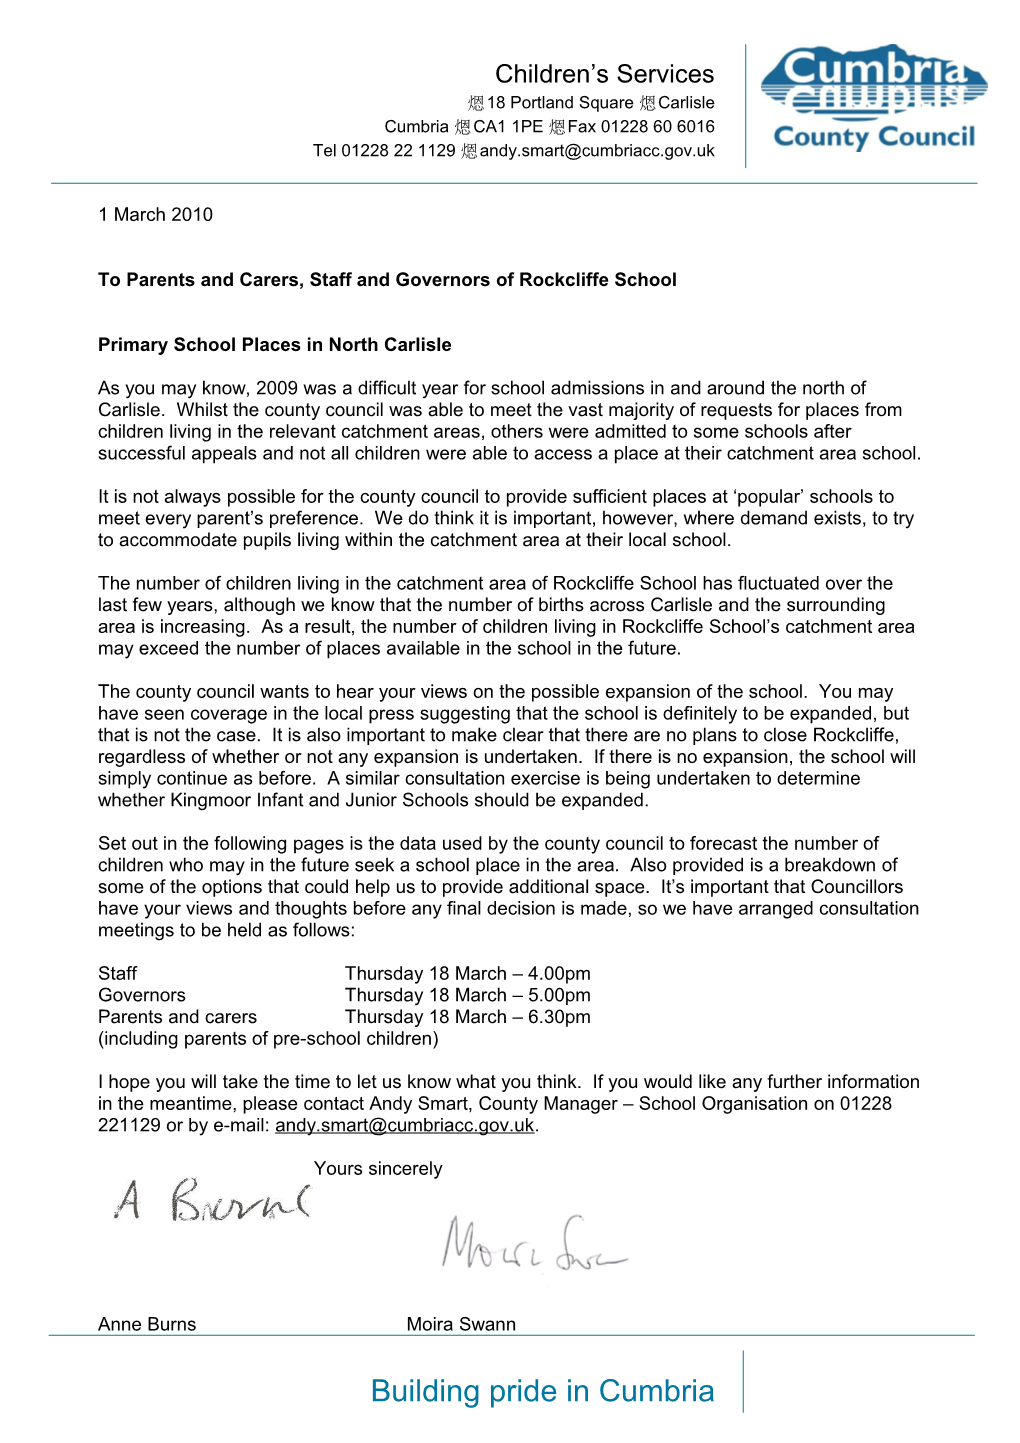 To Parents and Carers, Staff and Governors of Rockcliffe School